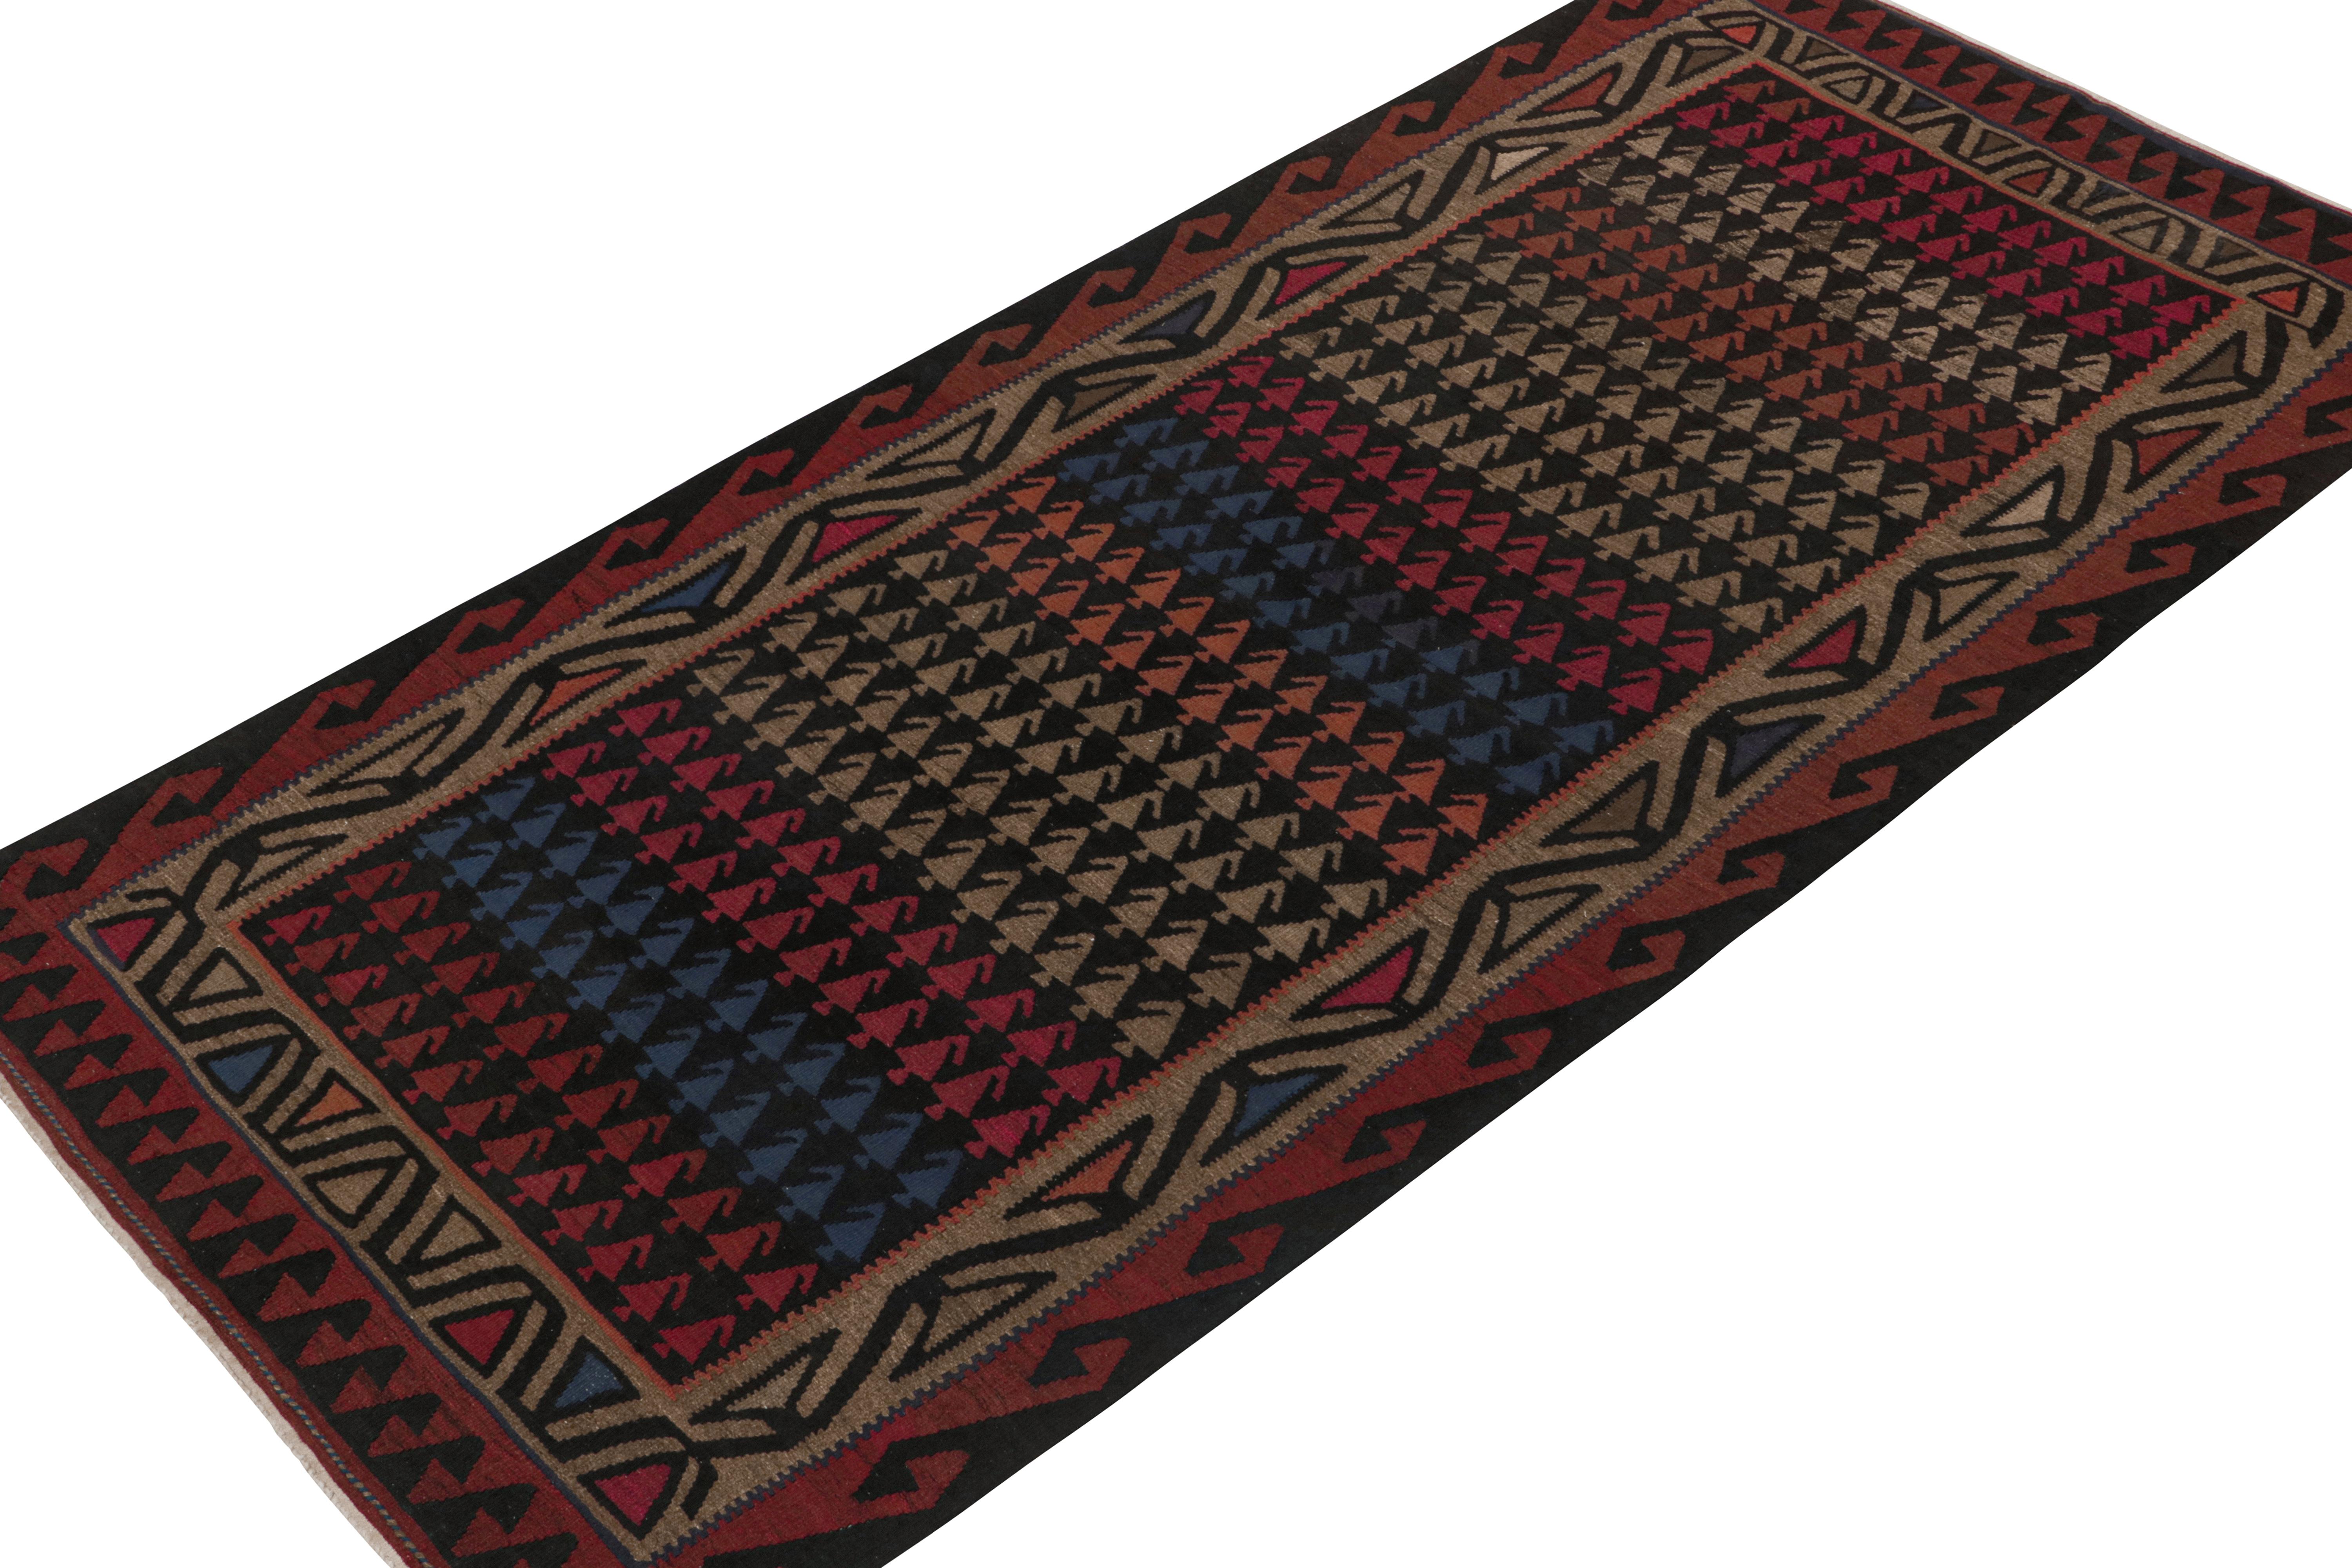 Tribal Vintage Persian Kilim in Polychromatic Patterns by Rug & Kilim For Sale